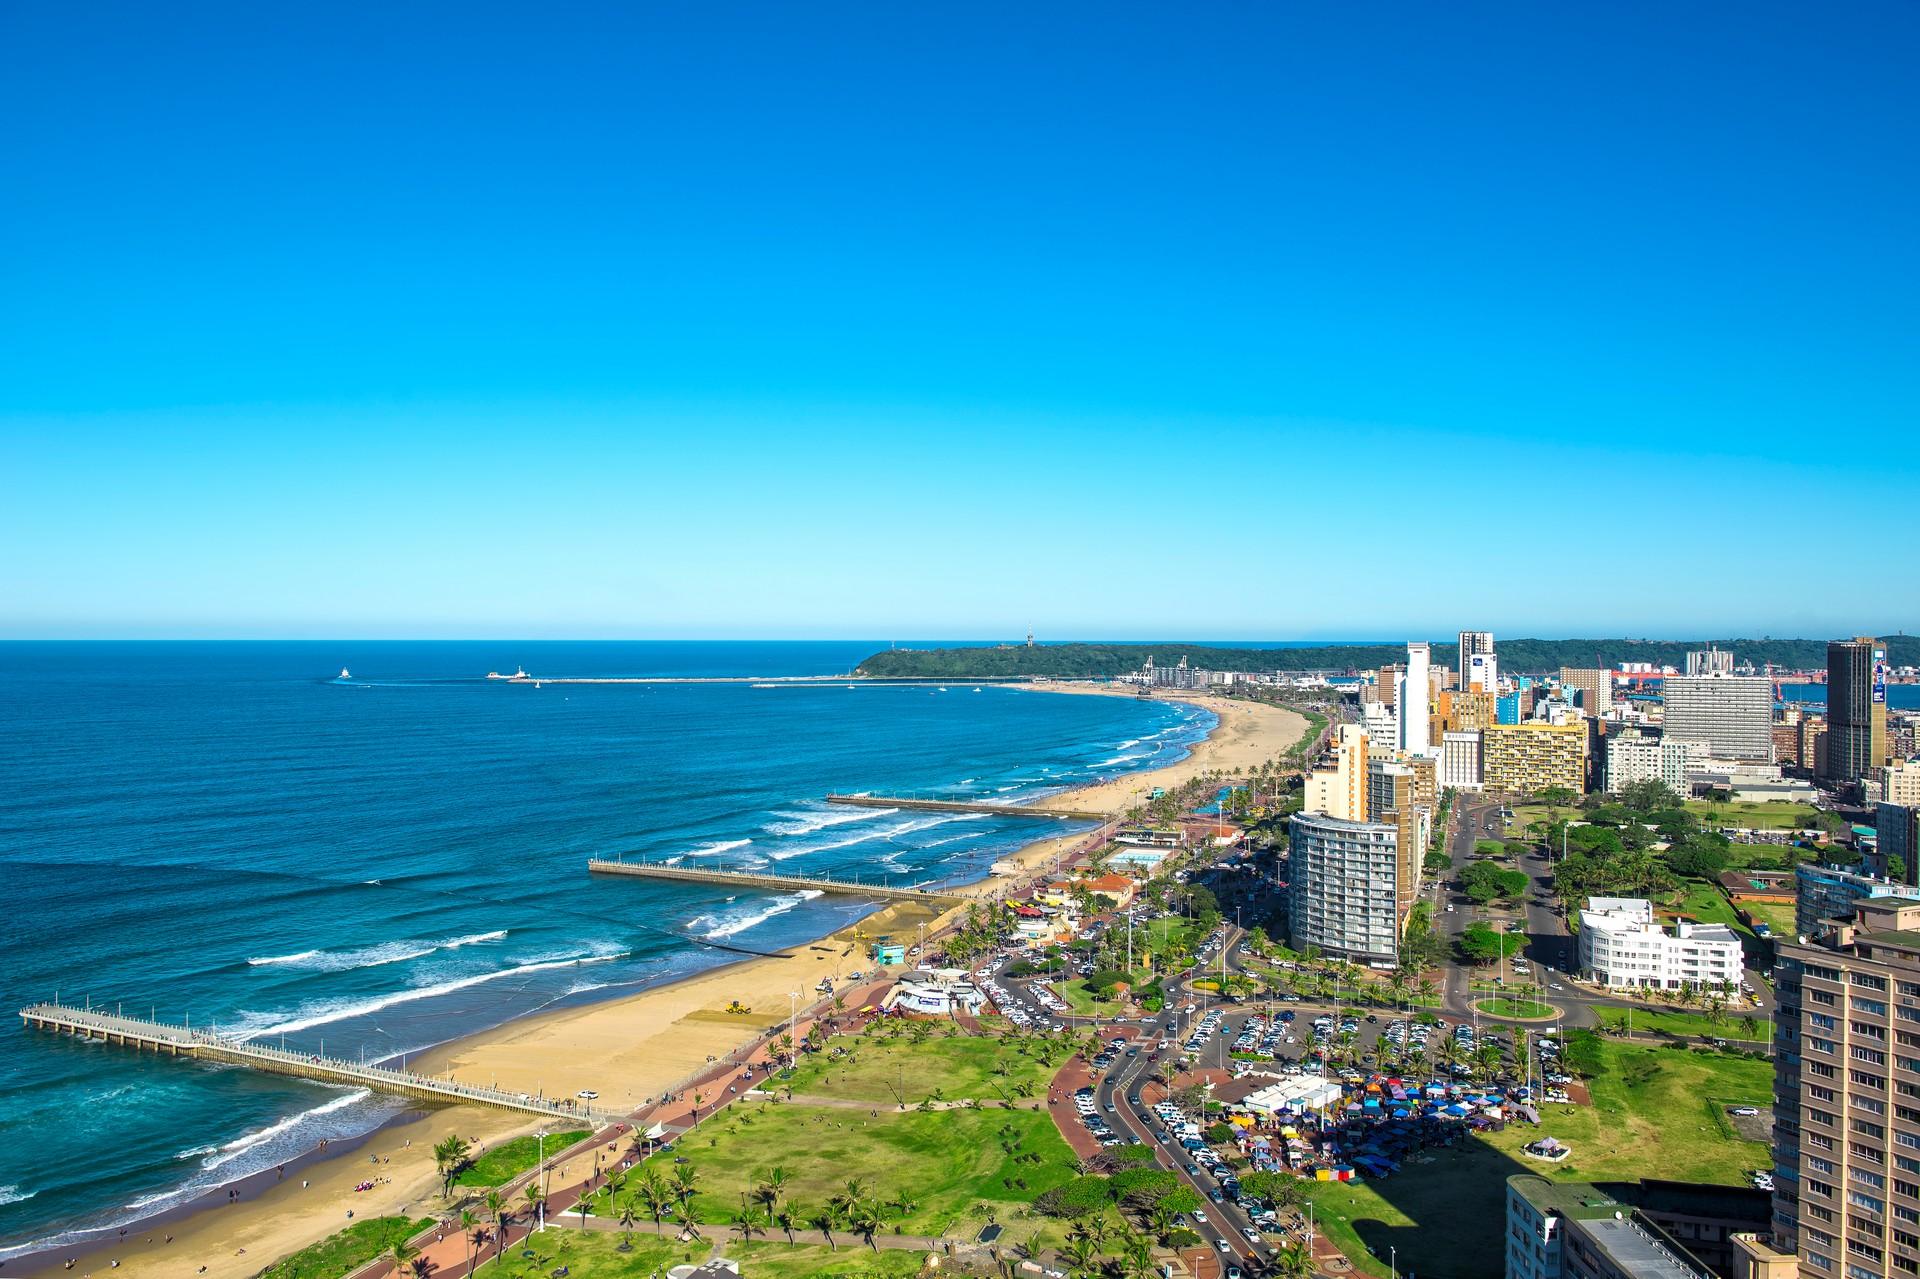 Aerial view of beach in Durban on a clear sky day